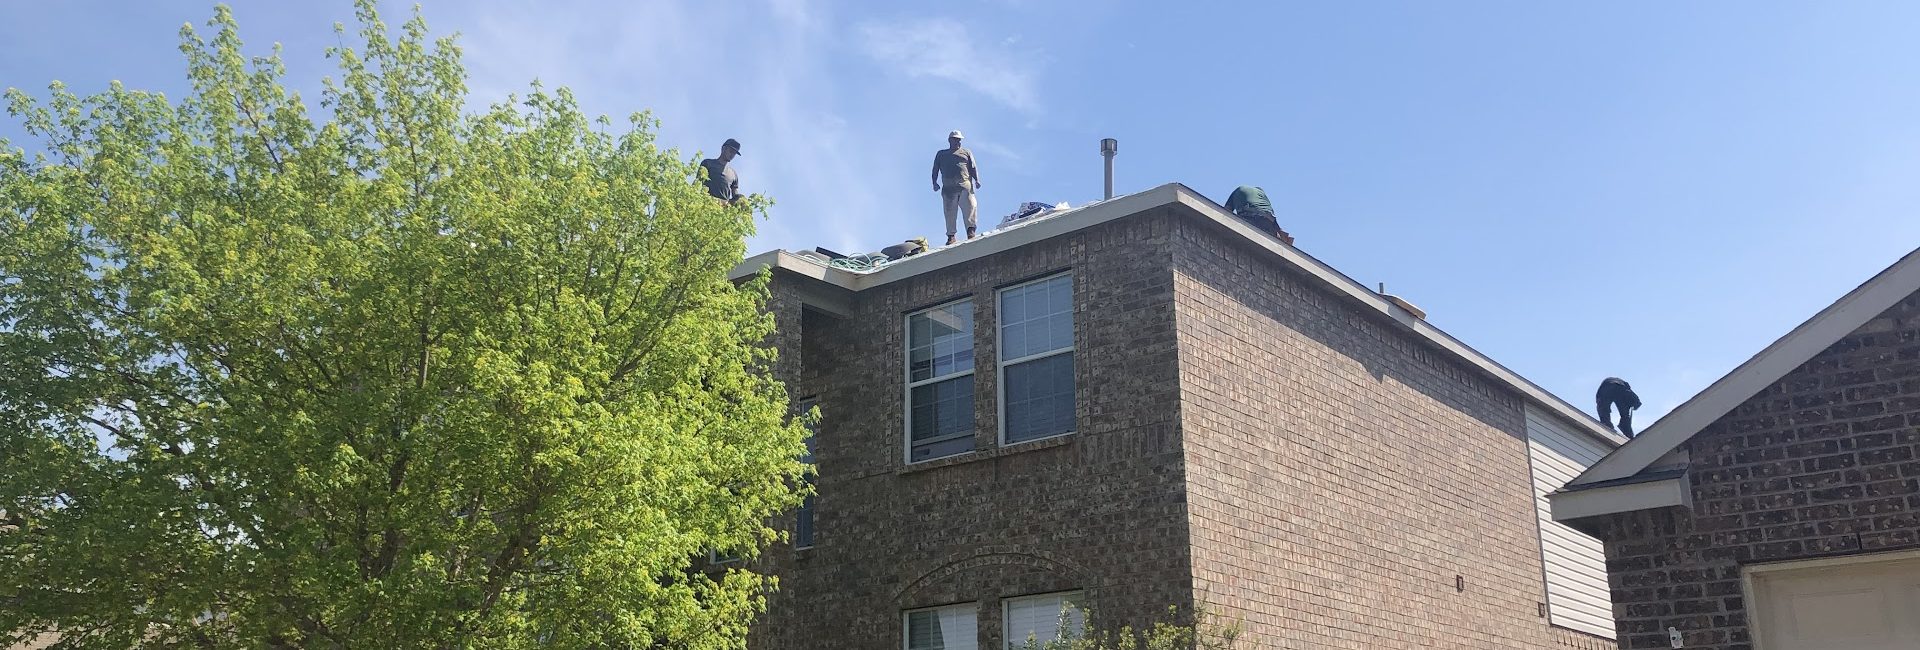 North Texas Roofing 4